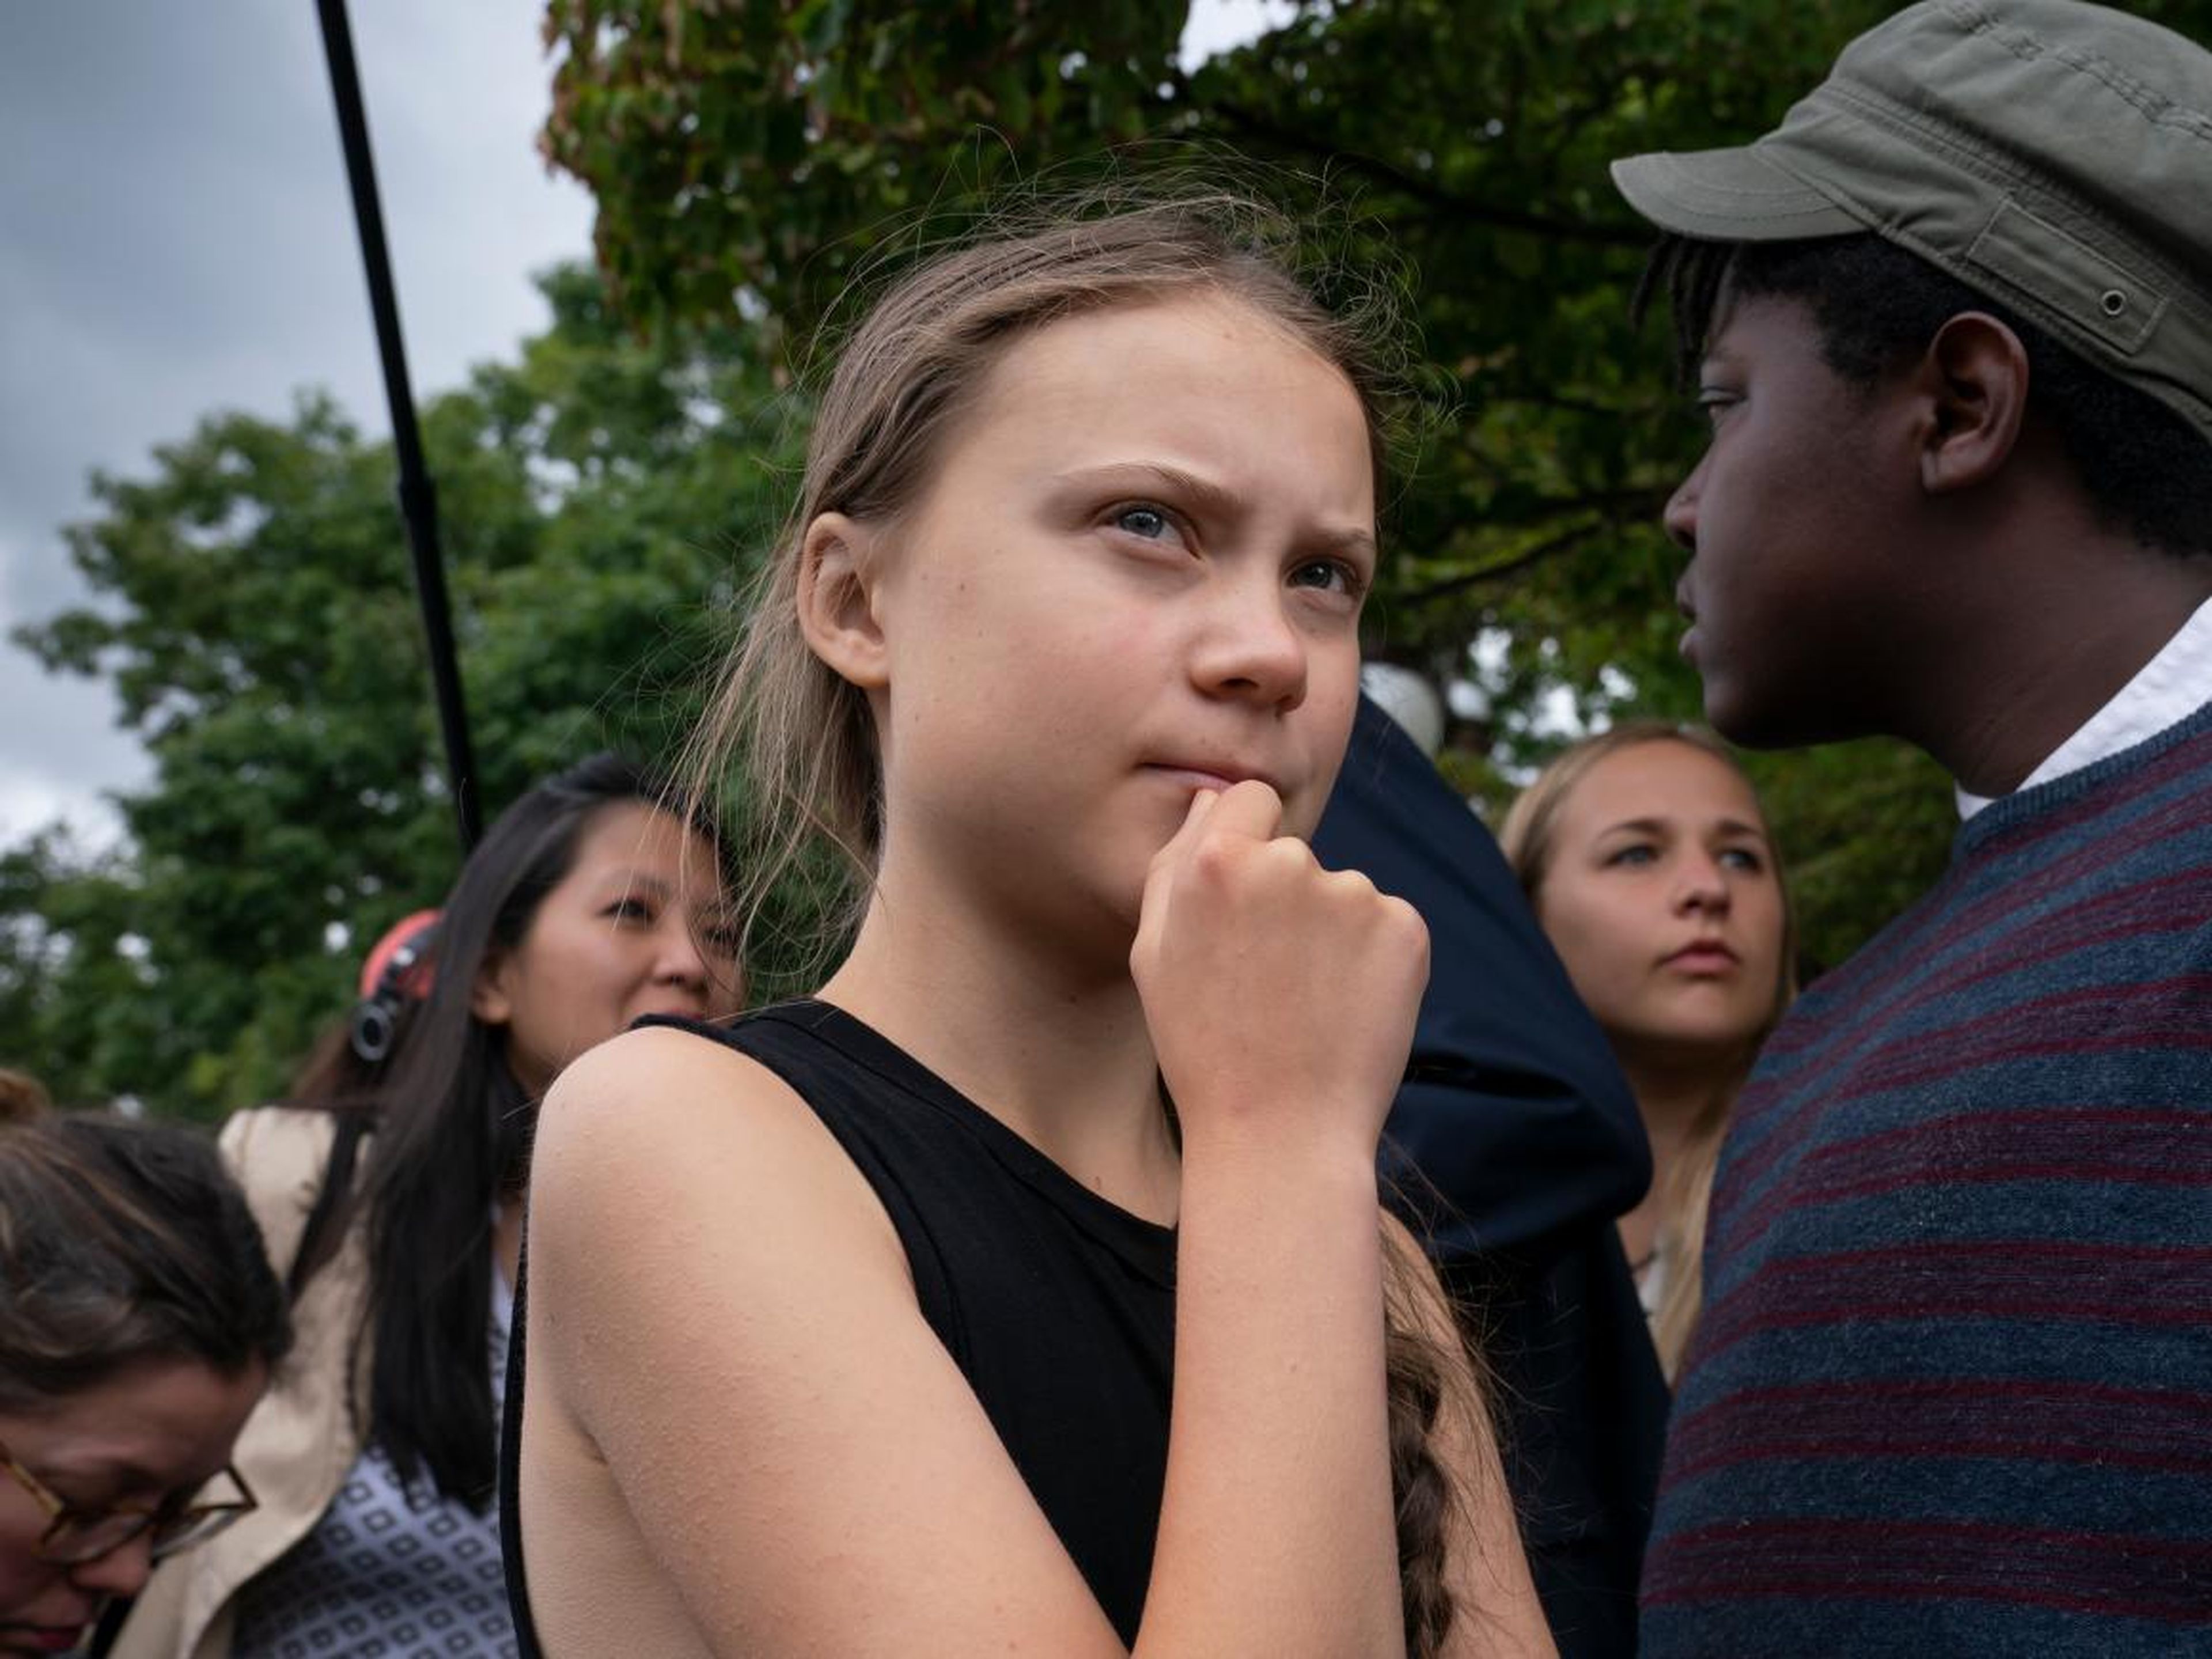 In the coming months, Thunberg plans to travel throughout the US, Canada, and Mexico, then attend the annual UN Climate Change Conference (COP25) in Santiago, Chile in December.